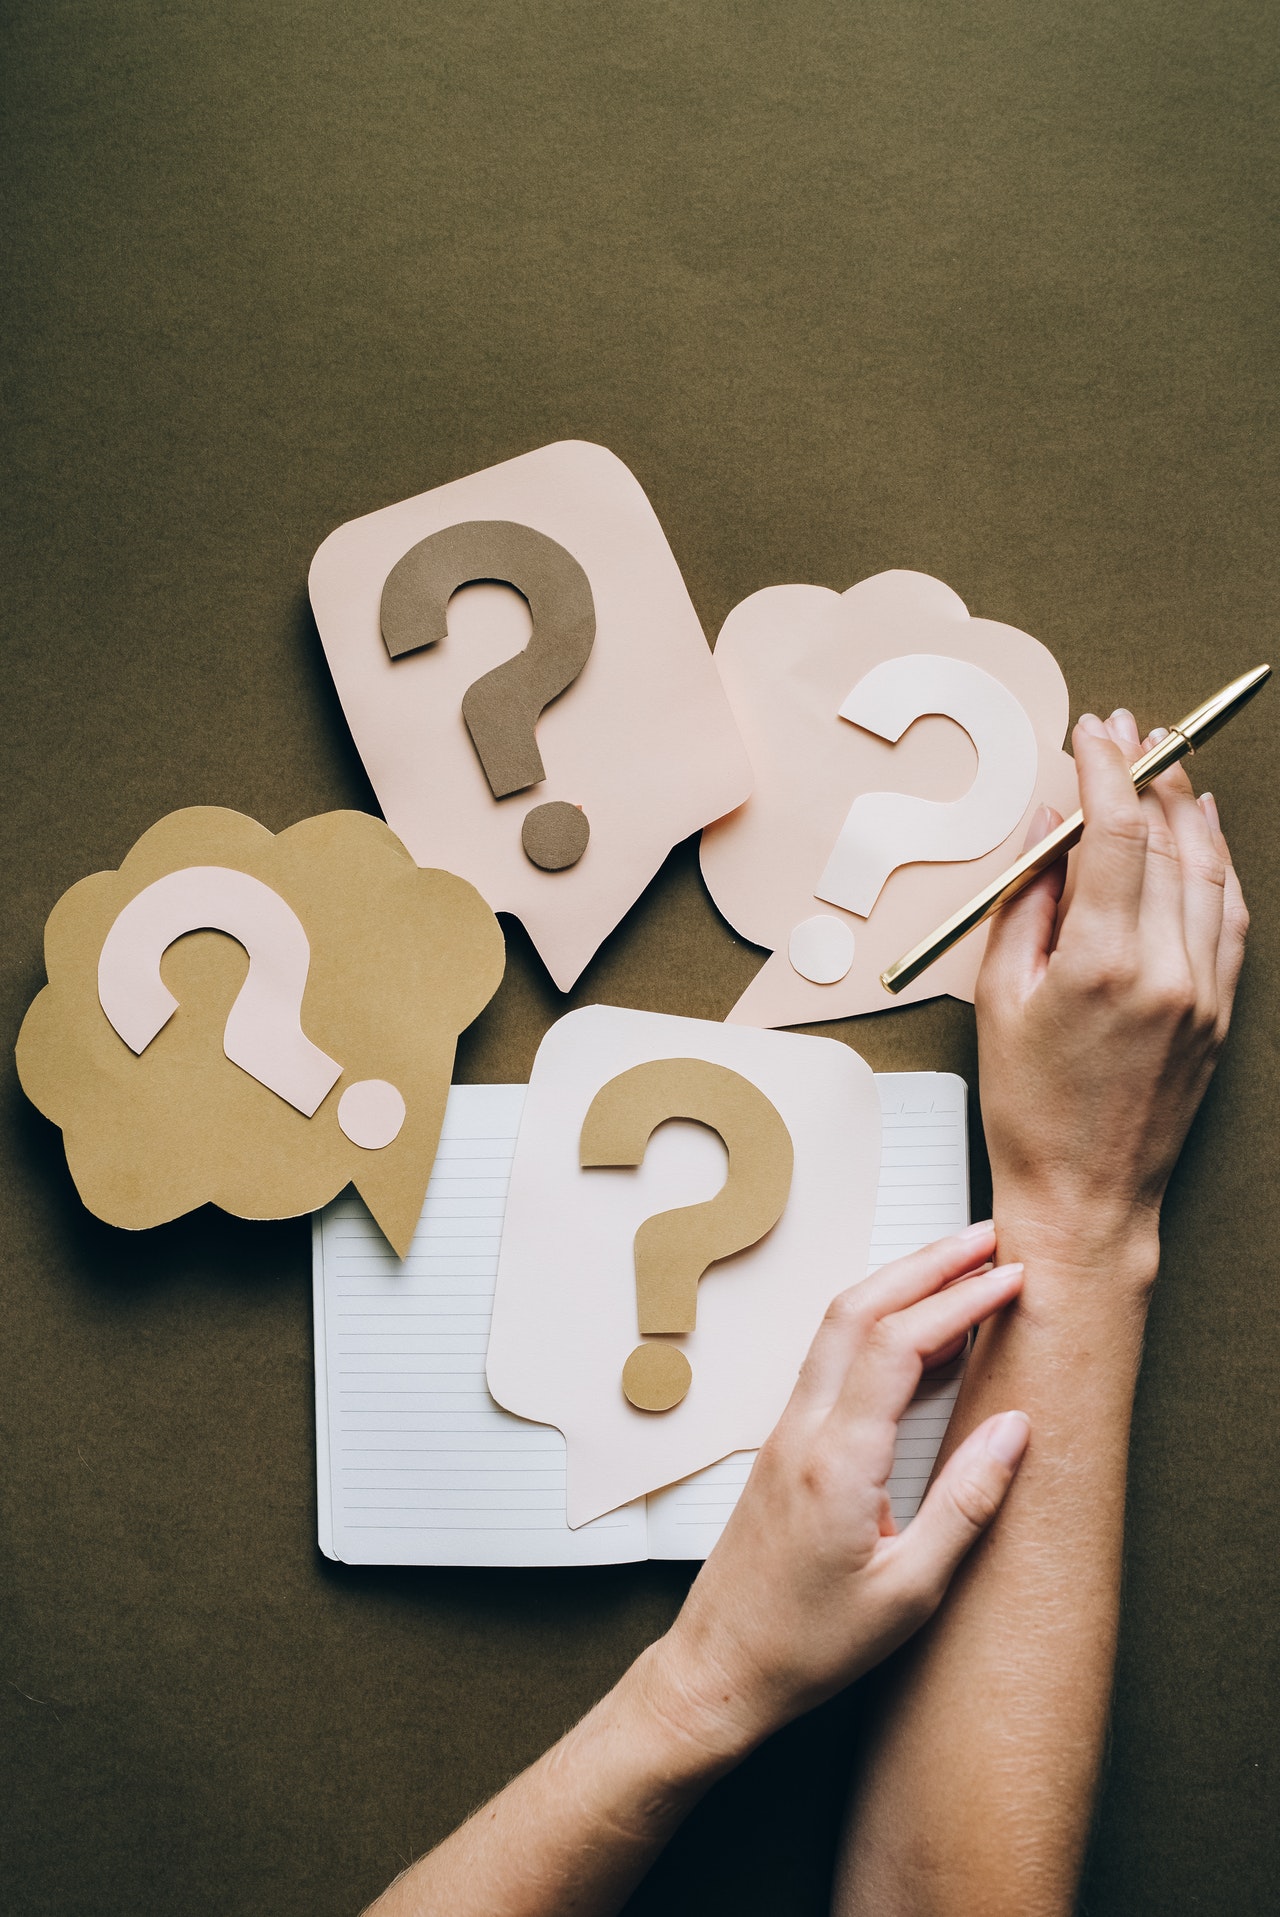 A top down view of a notebook, a pair of hands holding a pen and four cardboard cutouts of question marks